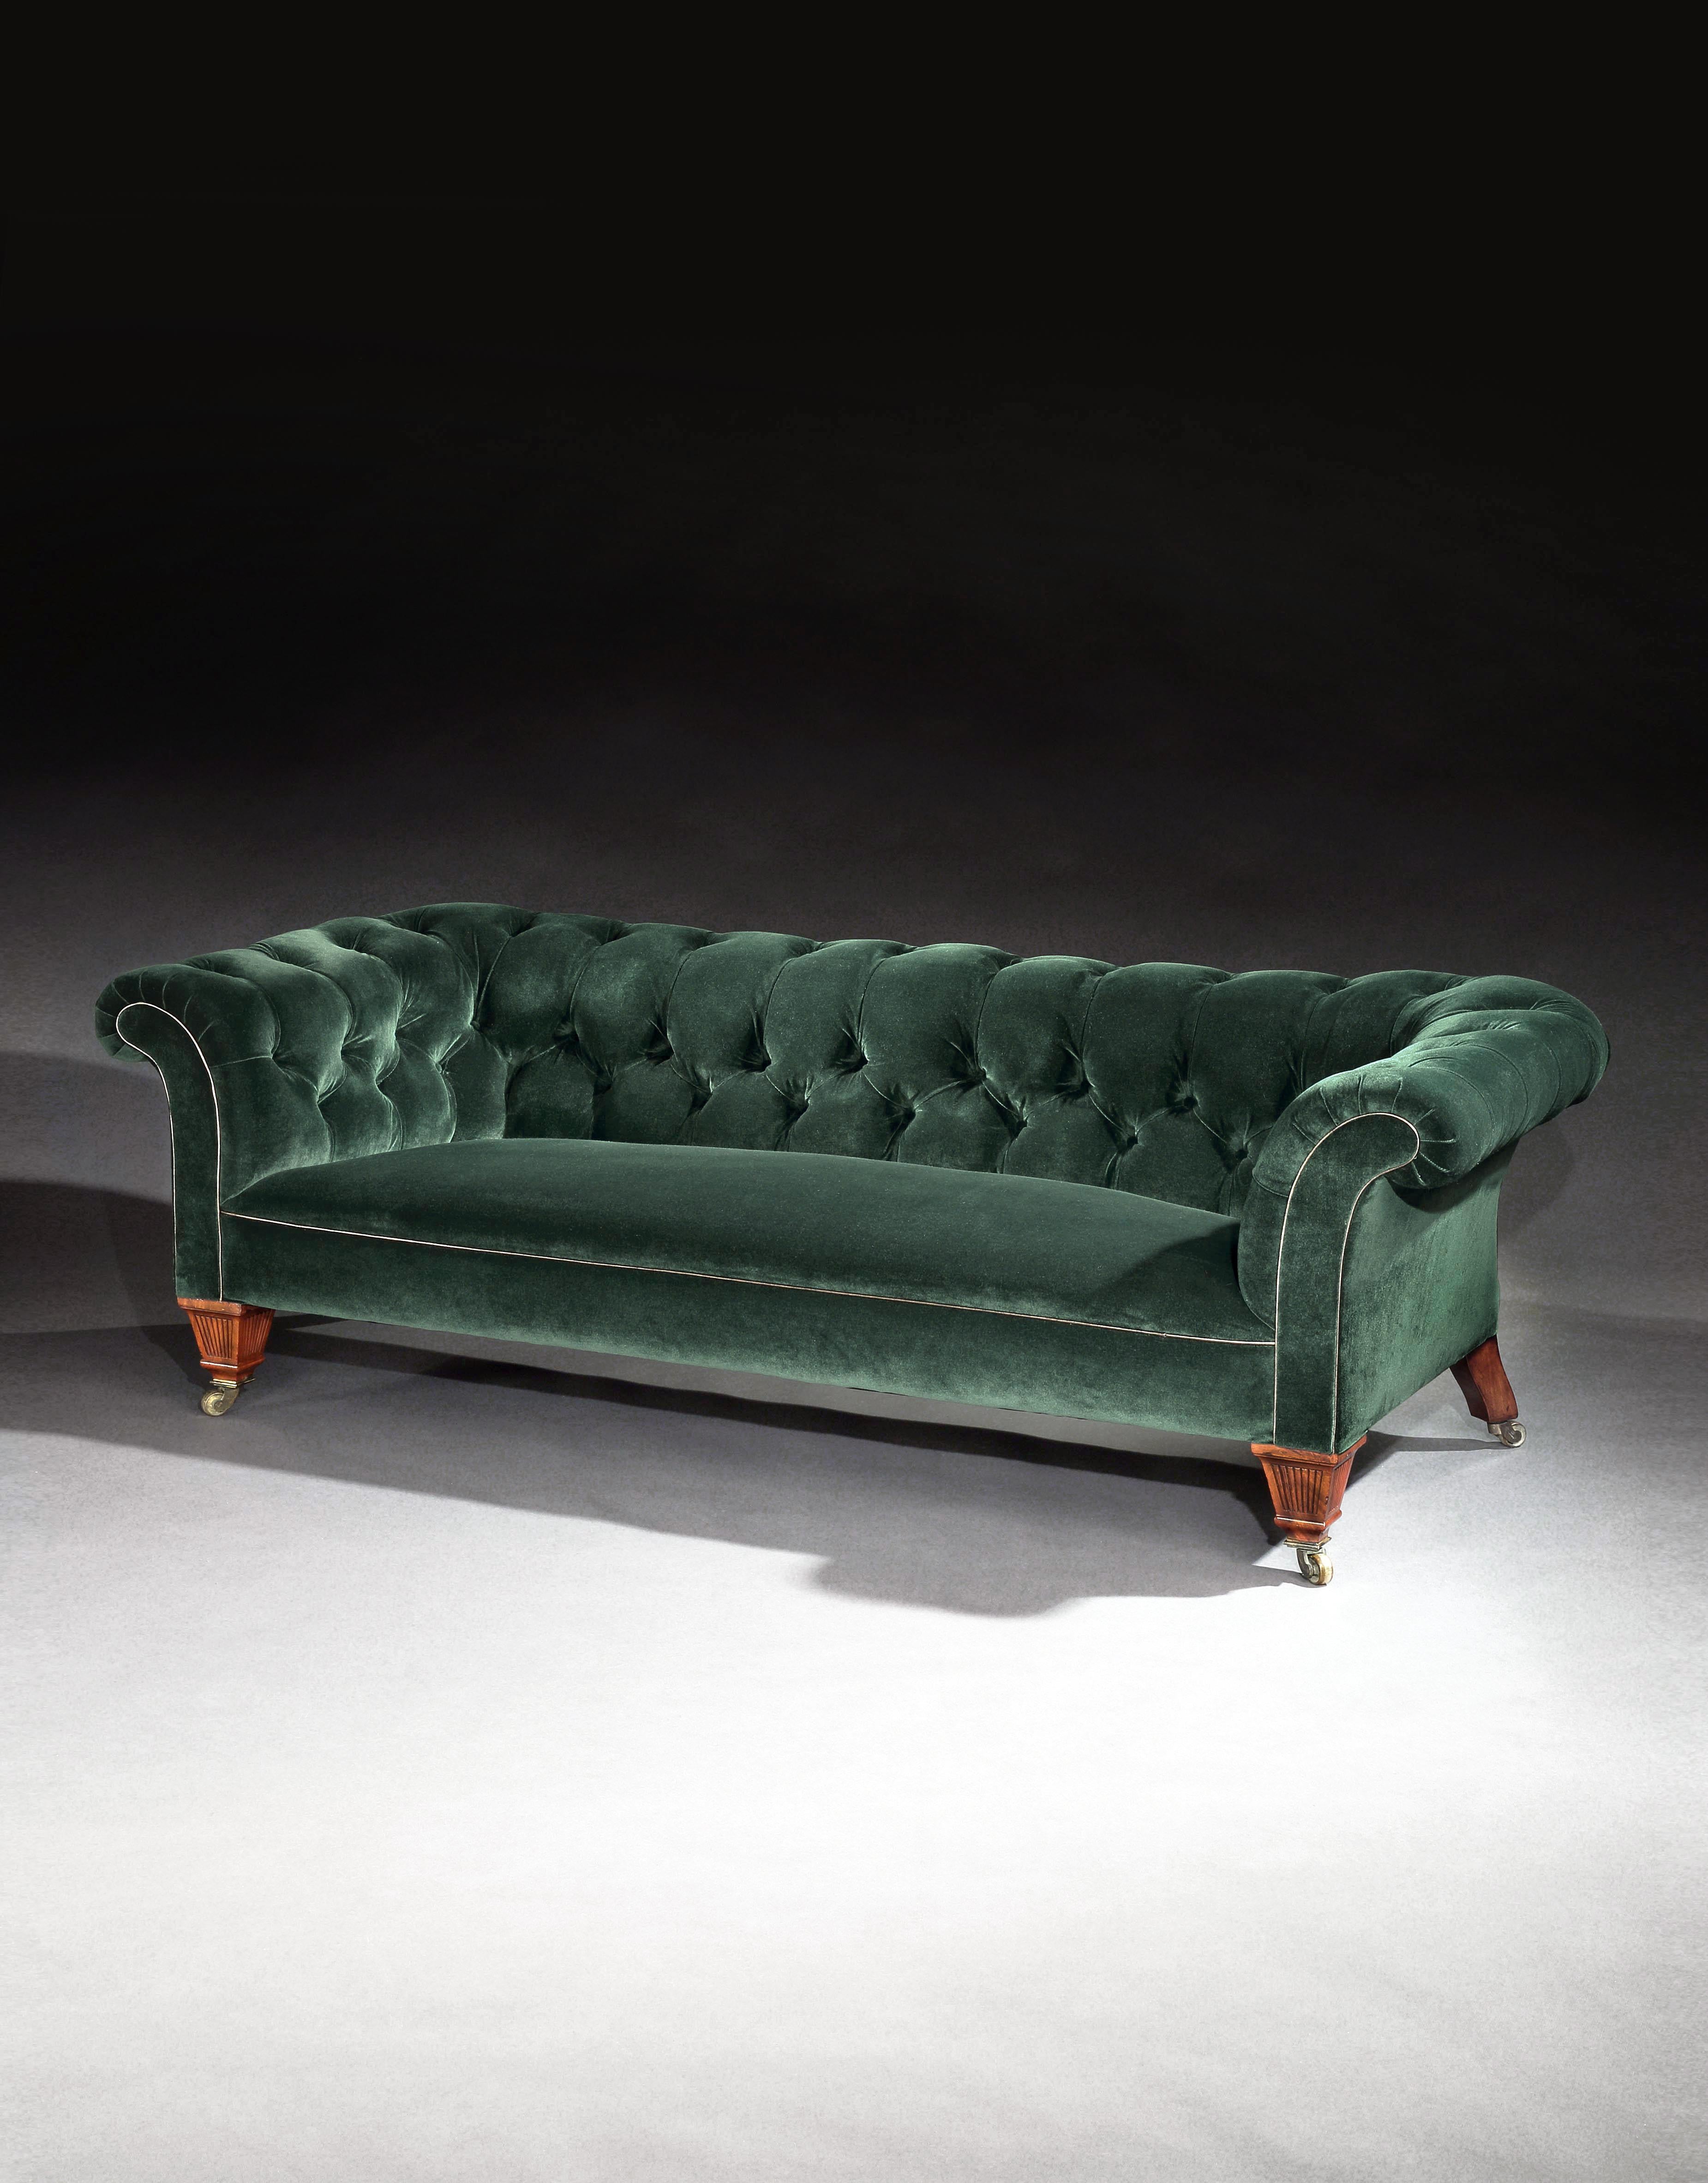 English 19th Century Victorian Chesterfield Sofa Upholstered in a Green Velvet C Hindley